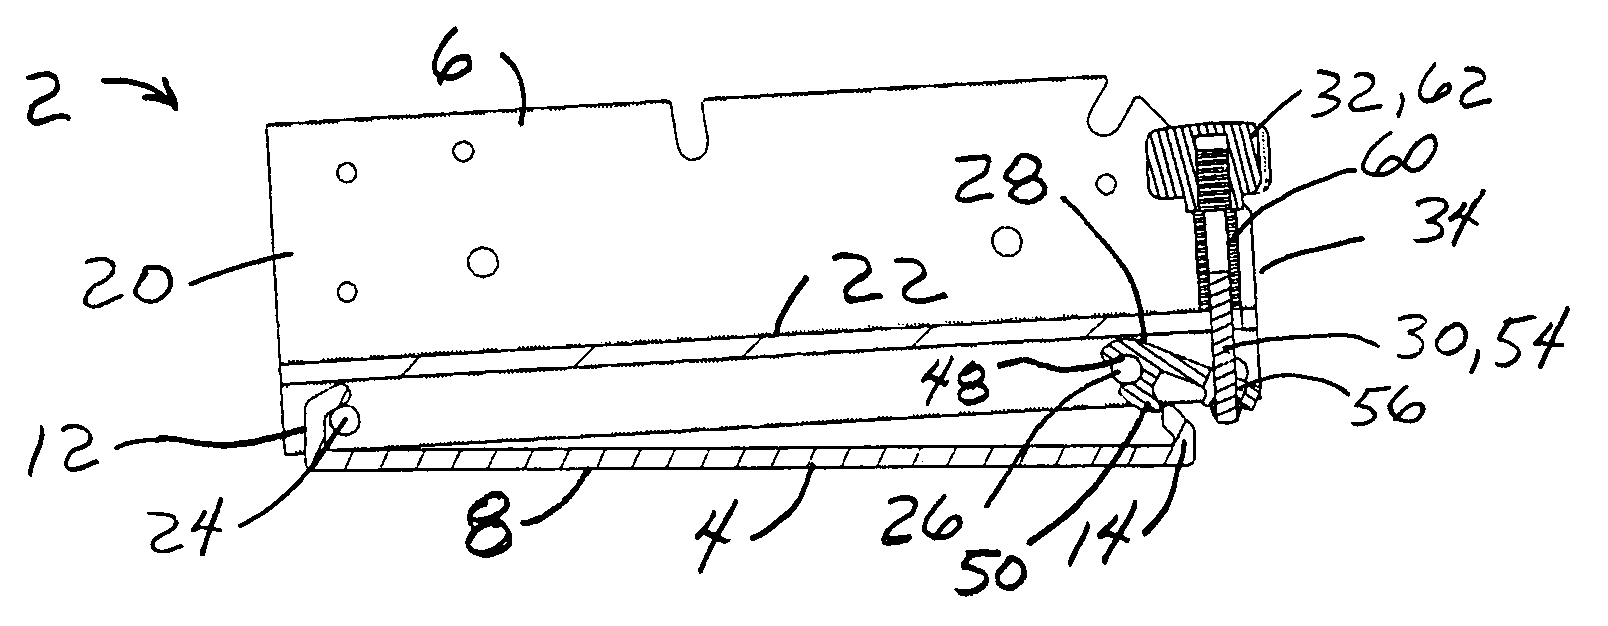 Releasable mounting apparatus and trolling motor assembly